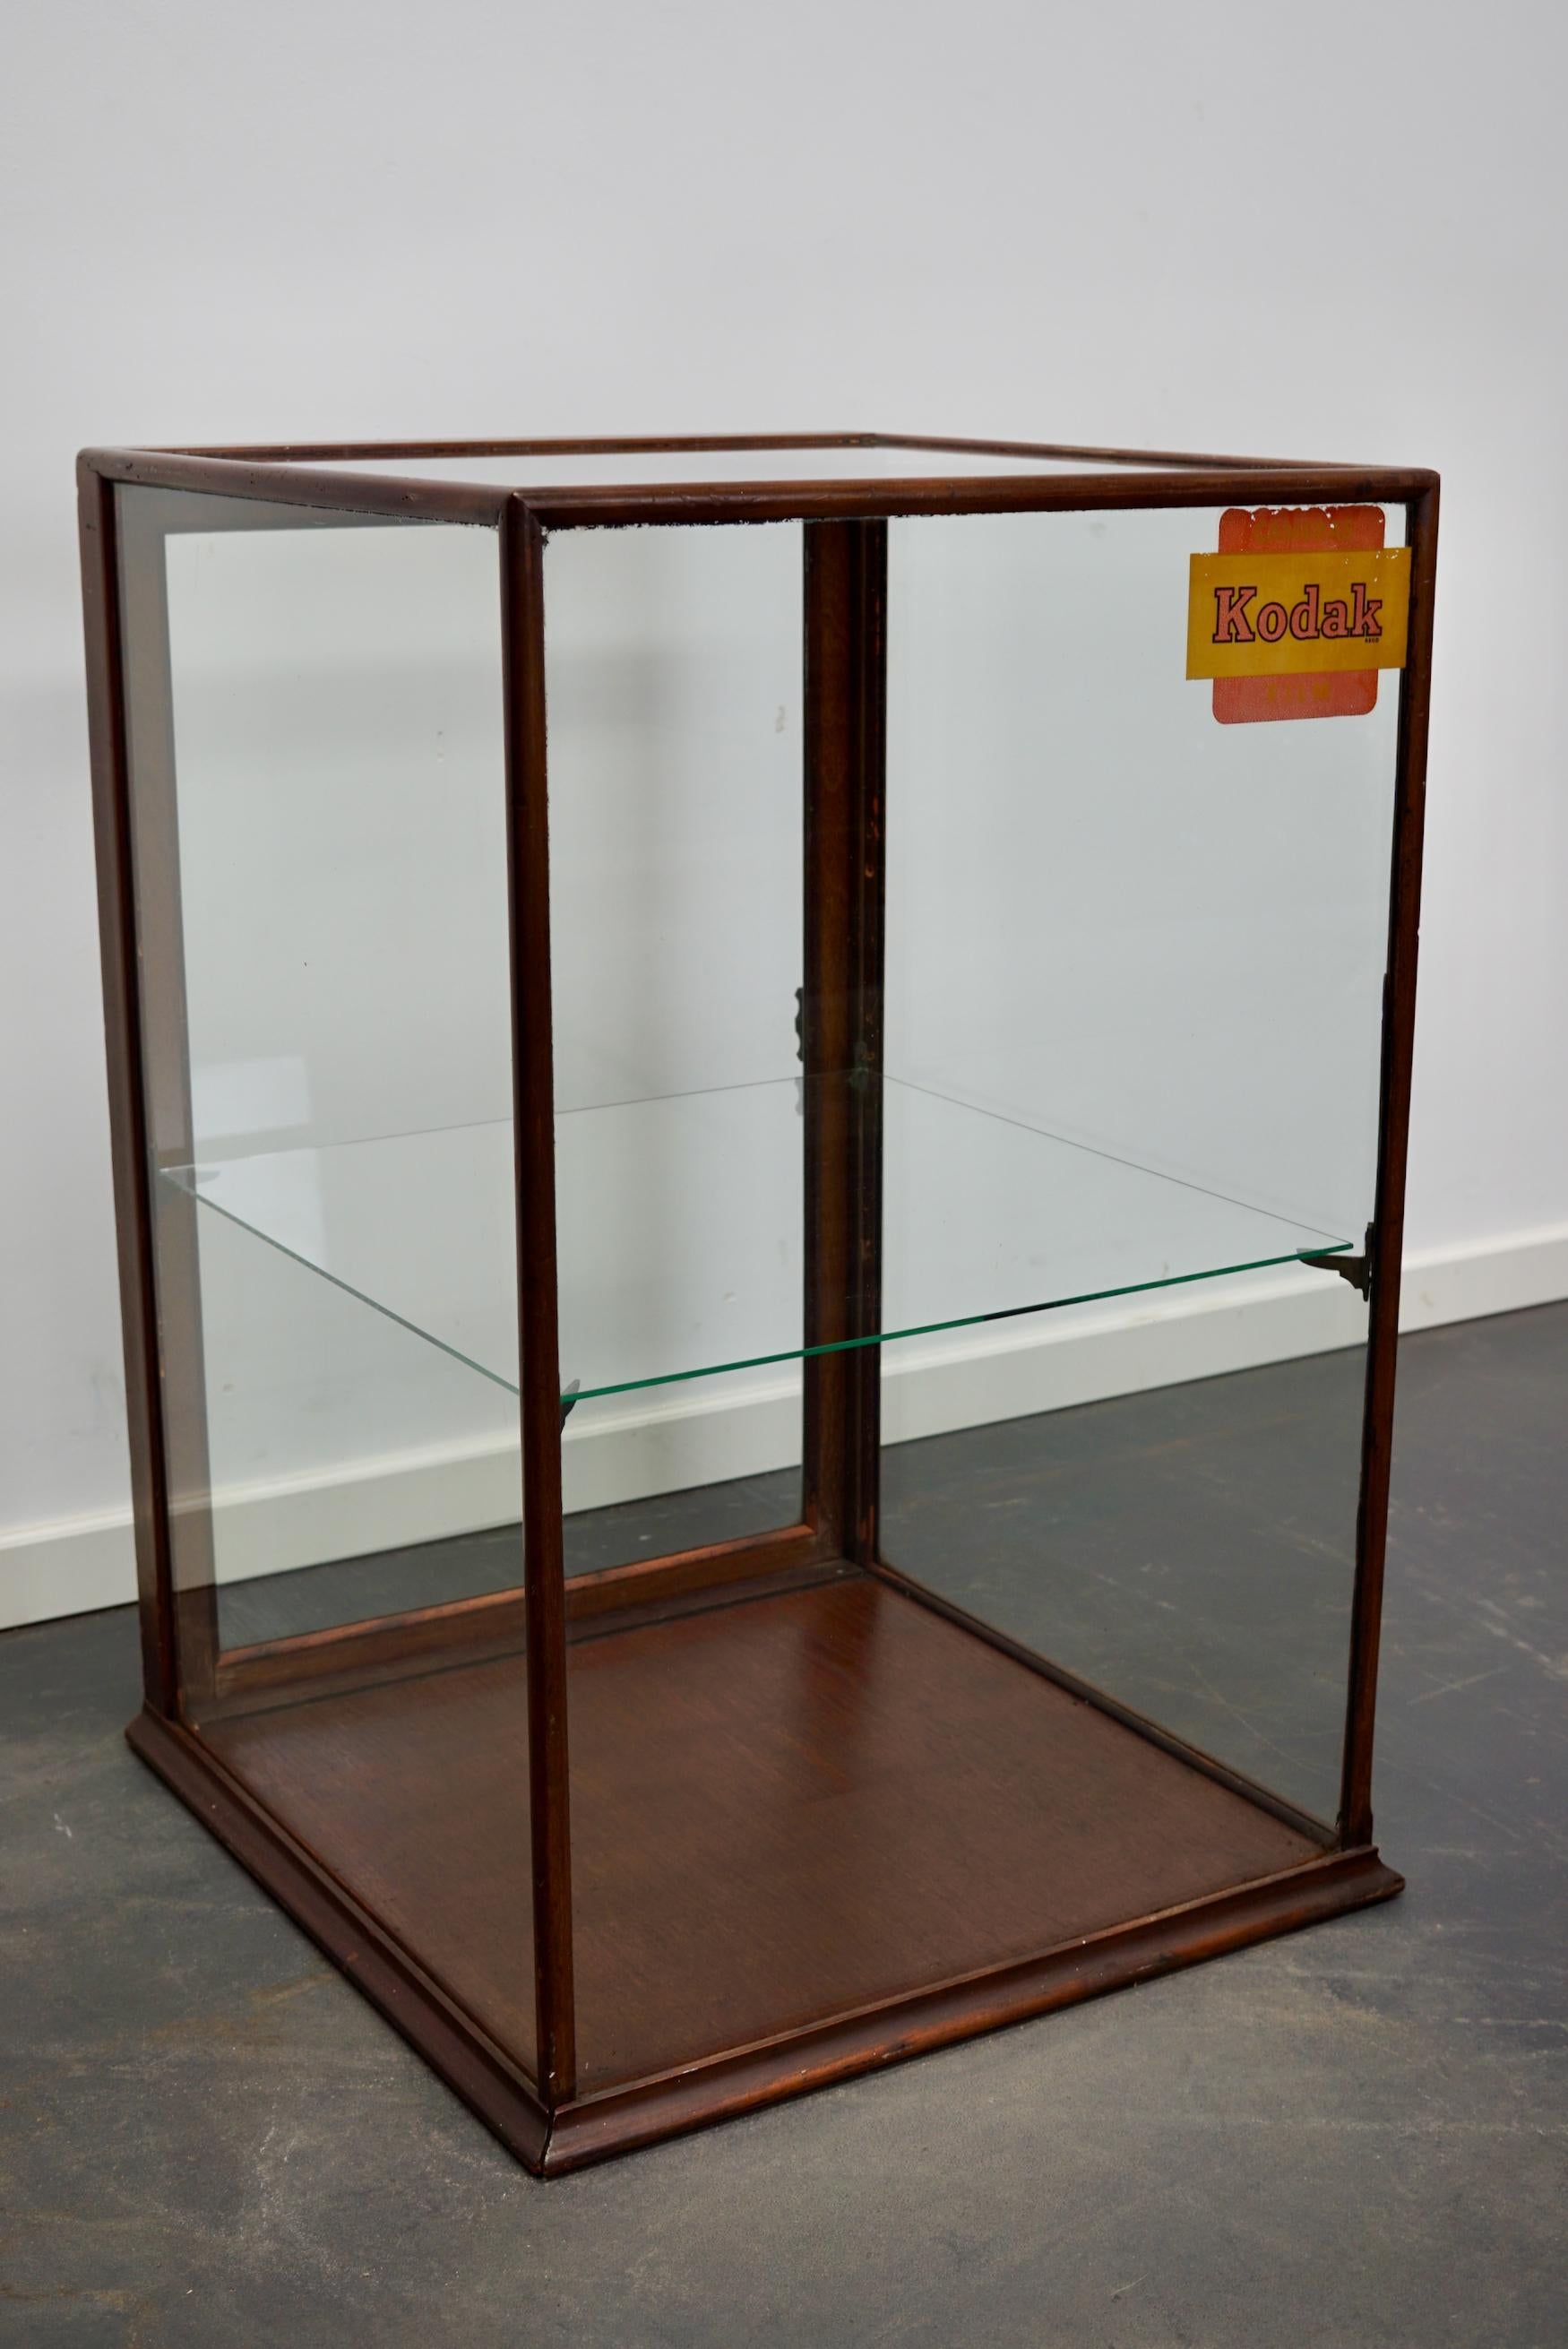 A museum quality Victorian mahogany display cabinet. This outstanding cabinet has a glass door fitted with the original knob handle. At some point in it's life it was used in a camera store.